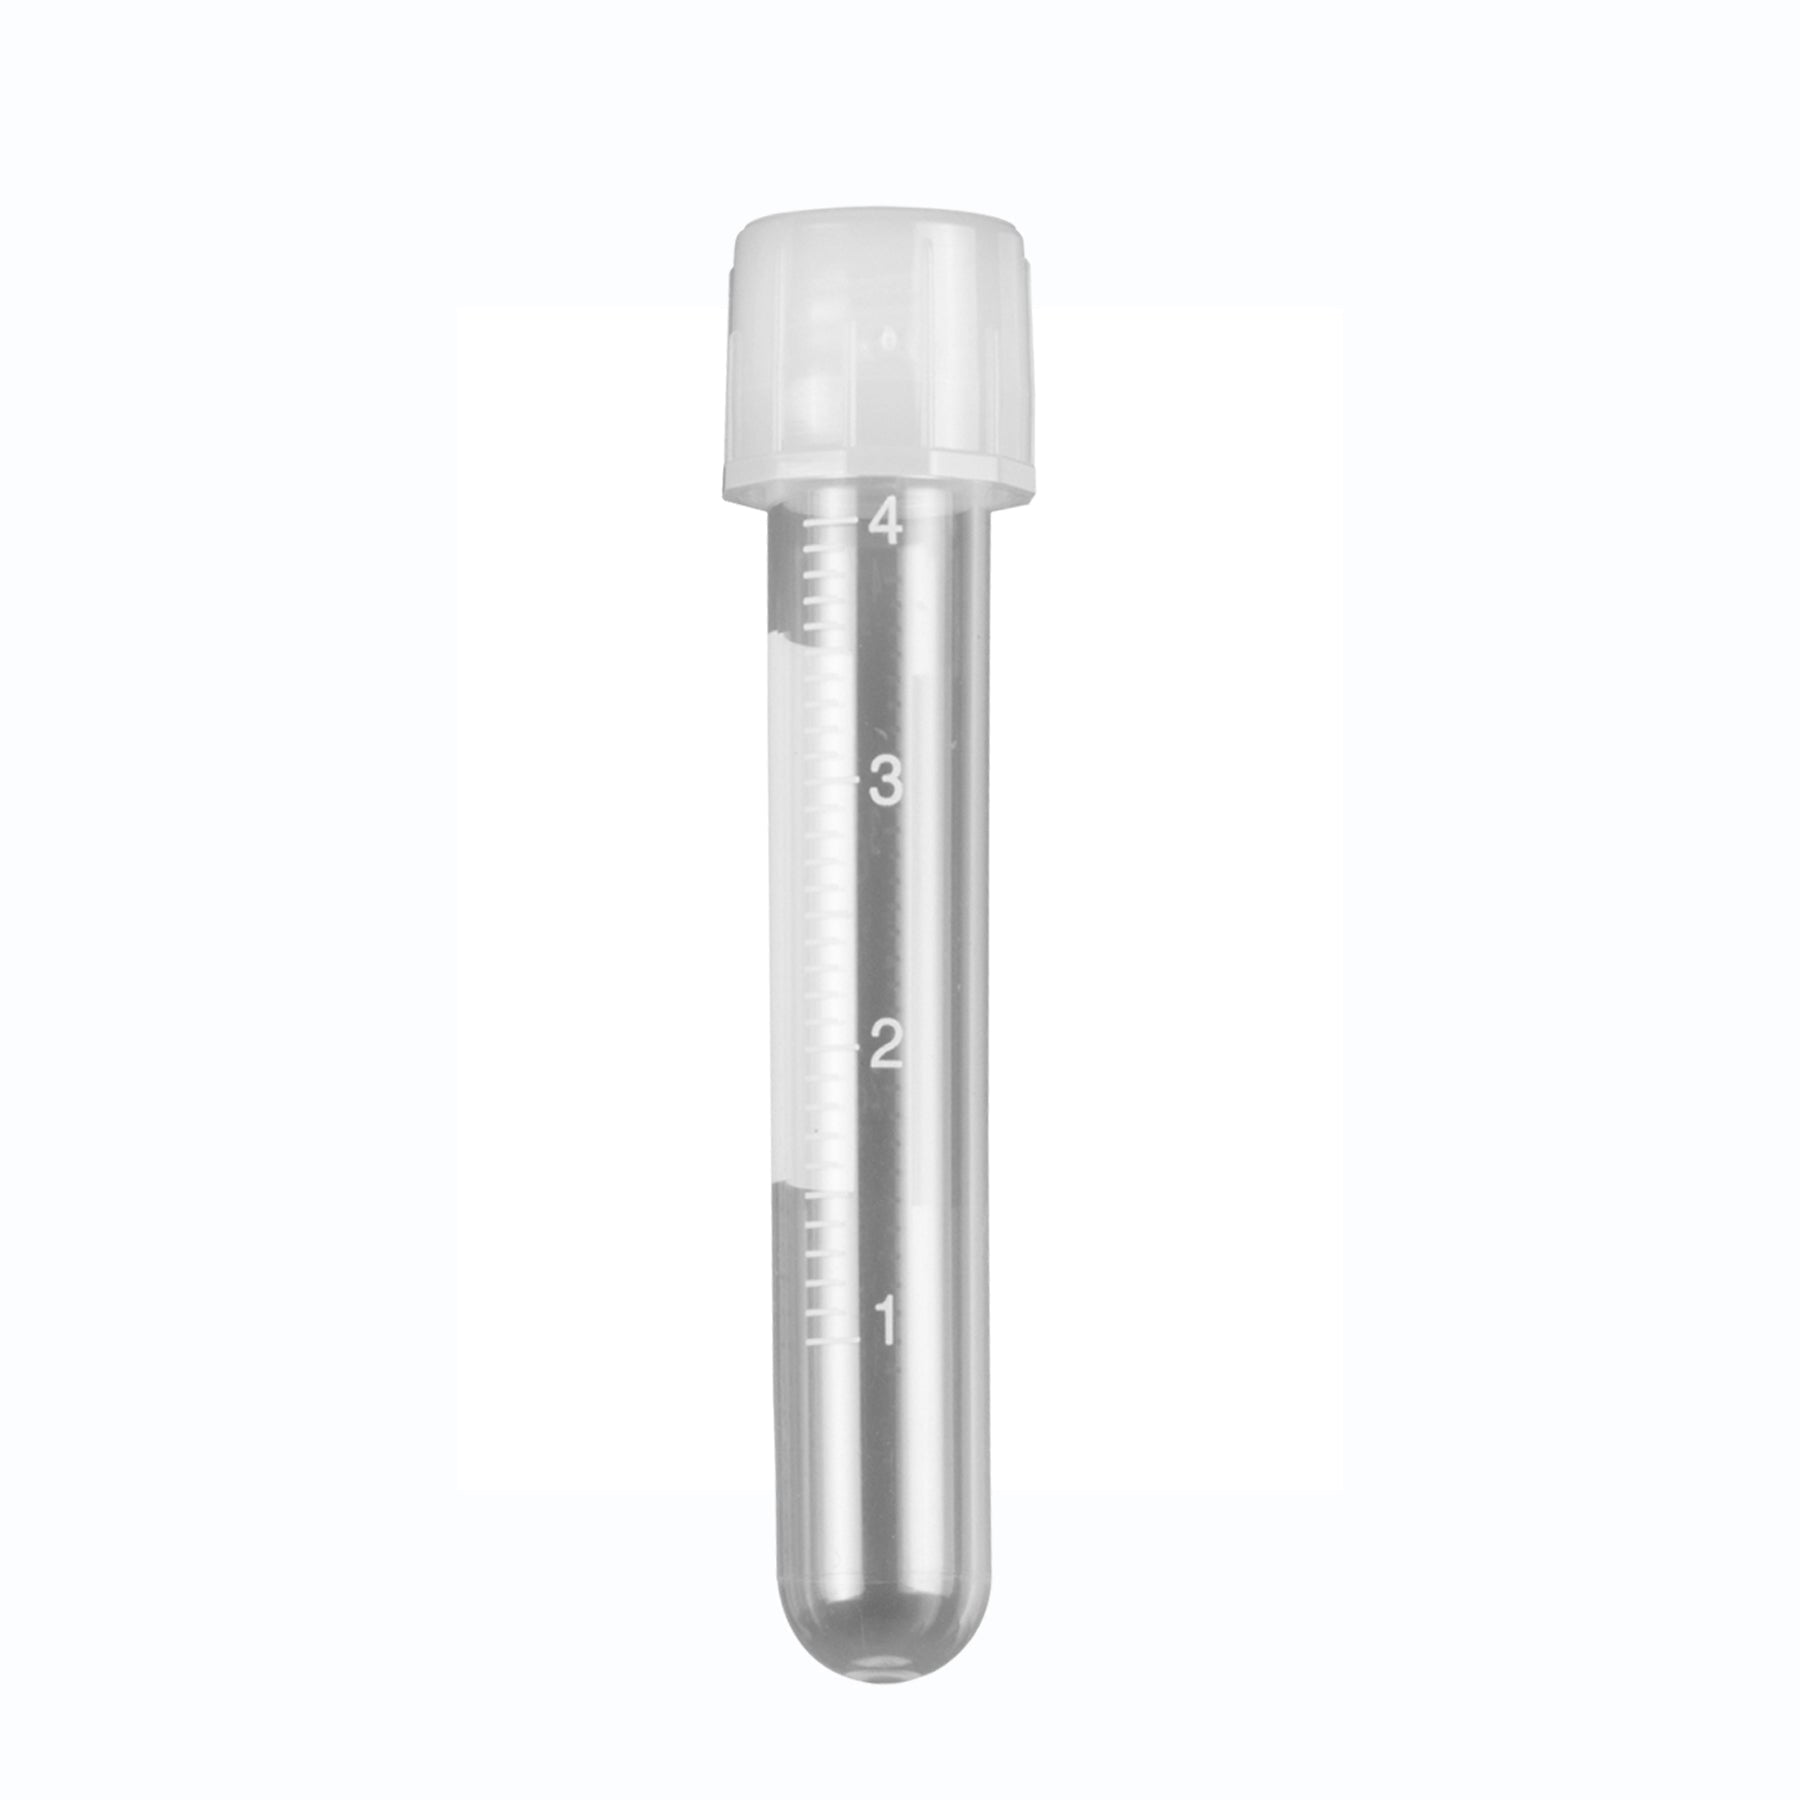 MTC Bio T8730 Culture Tube, 5mL, 12 x 75mm, PP, w/ attached 2-position screw-cap, printed graduations, sterile, 20 bags of 25 tubes